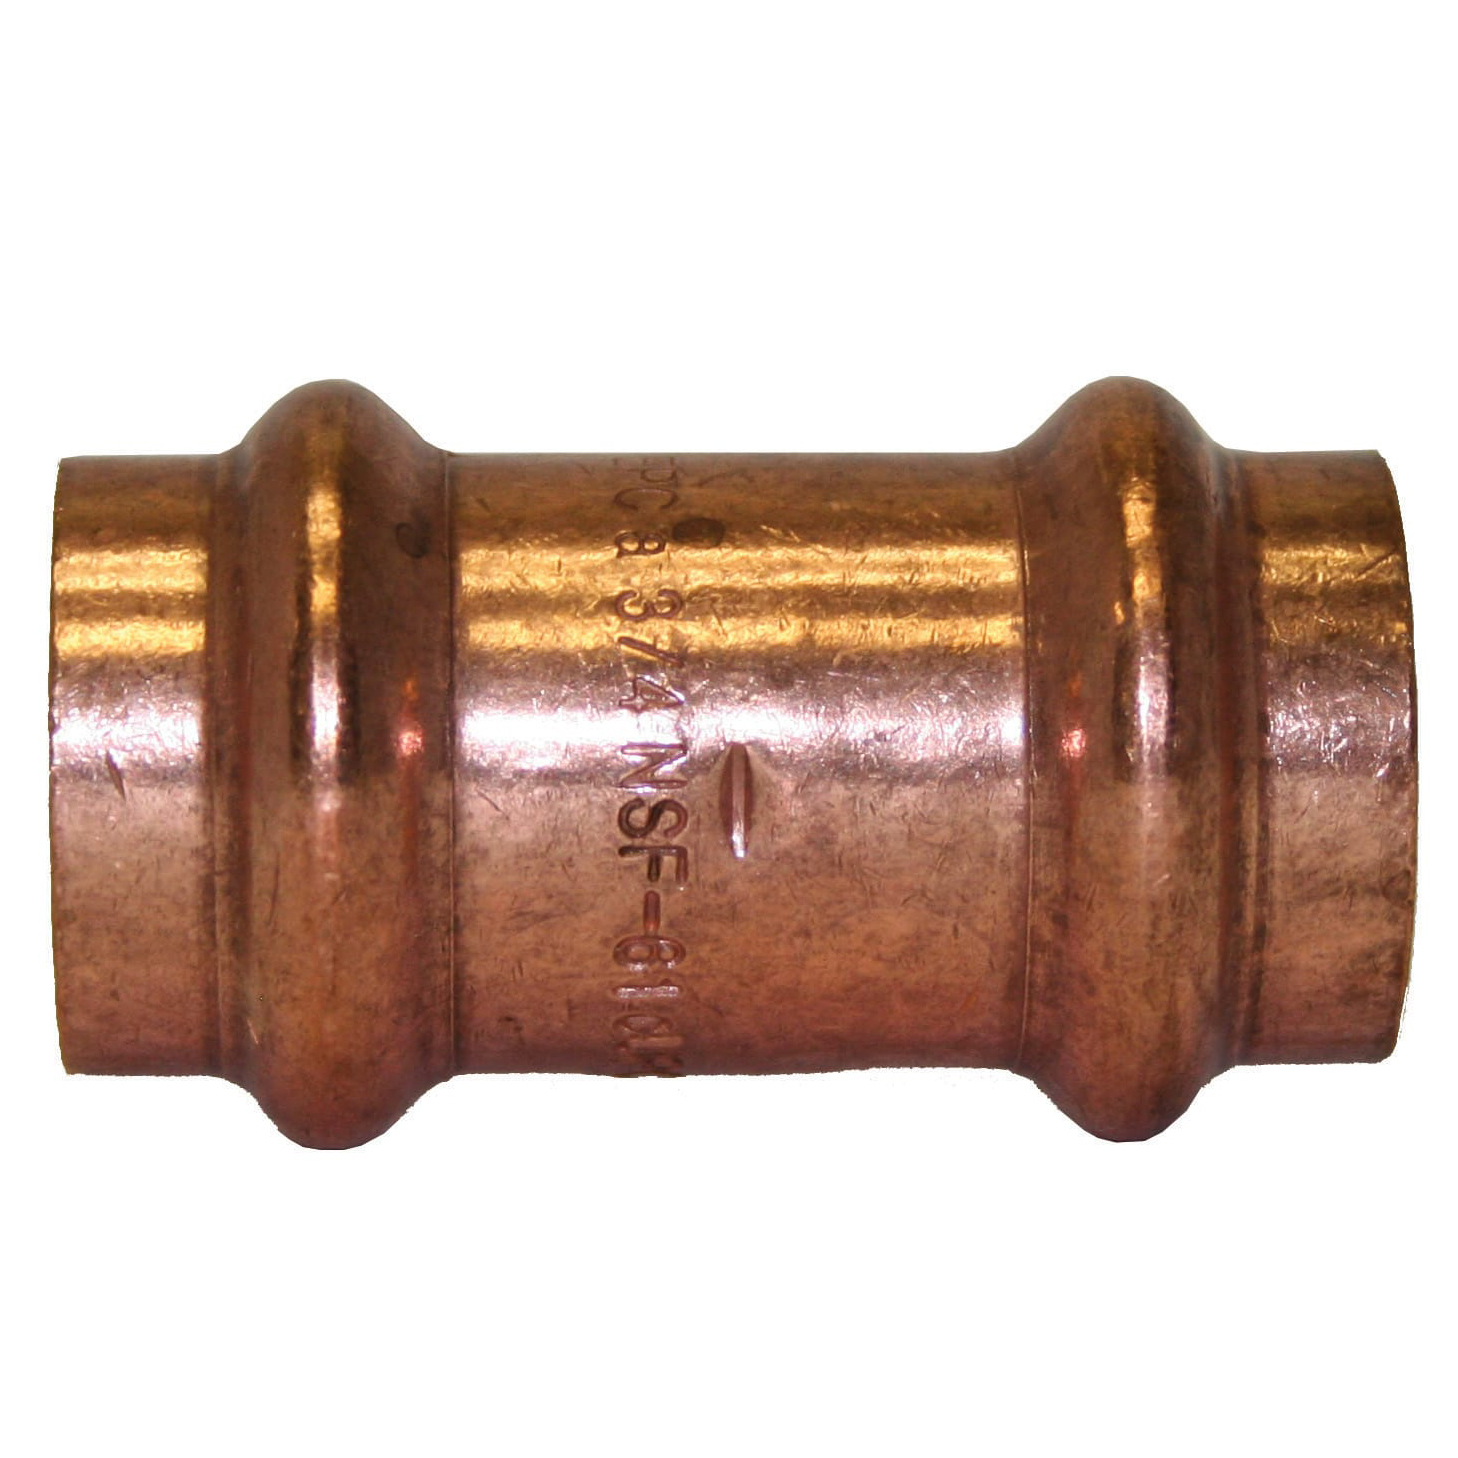 ApolloPRESS® 800 Coupling with Stop, Copper, Small Diameter, PxP, 1-1/2x1-1/2